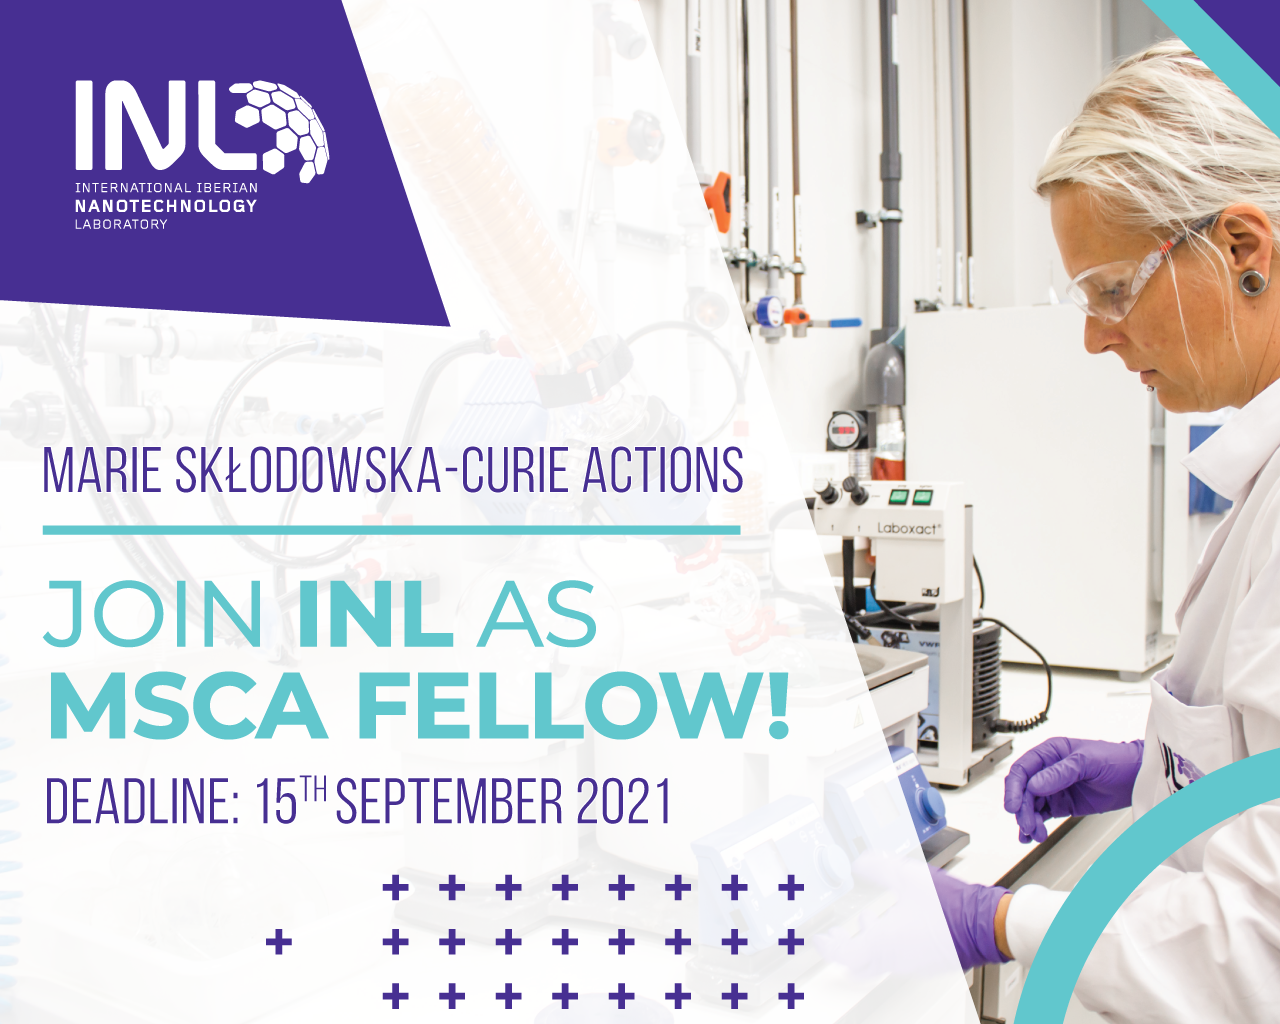 Thinking about taking your career to the next level? Join INL as a MSCA Fellow!